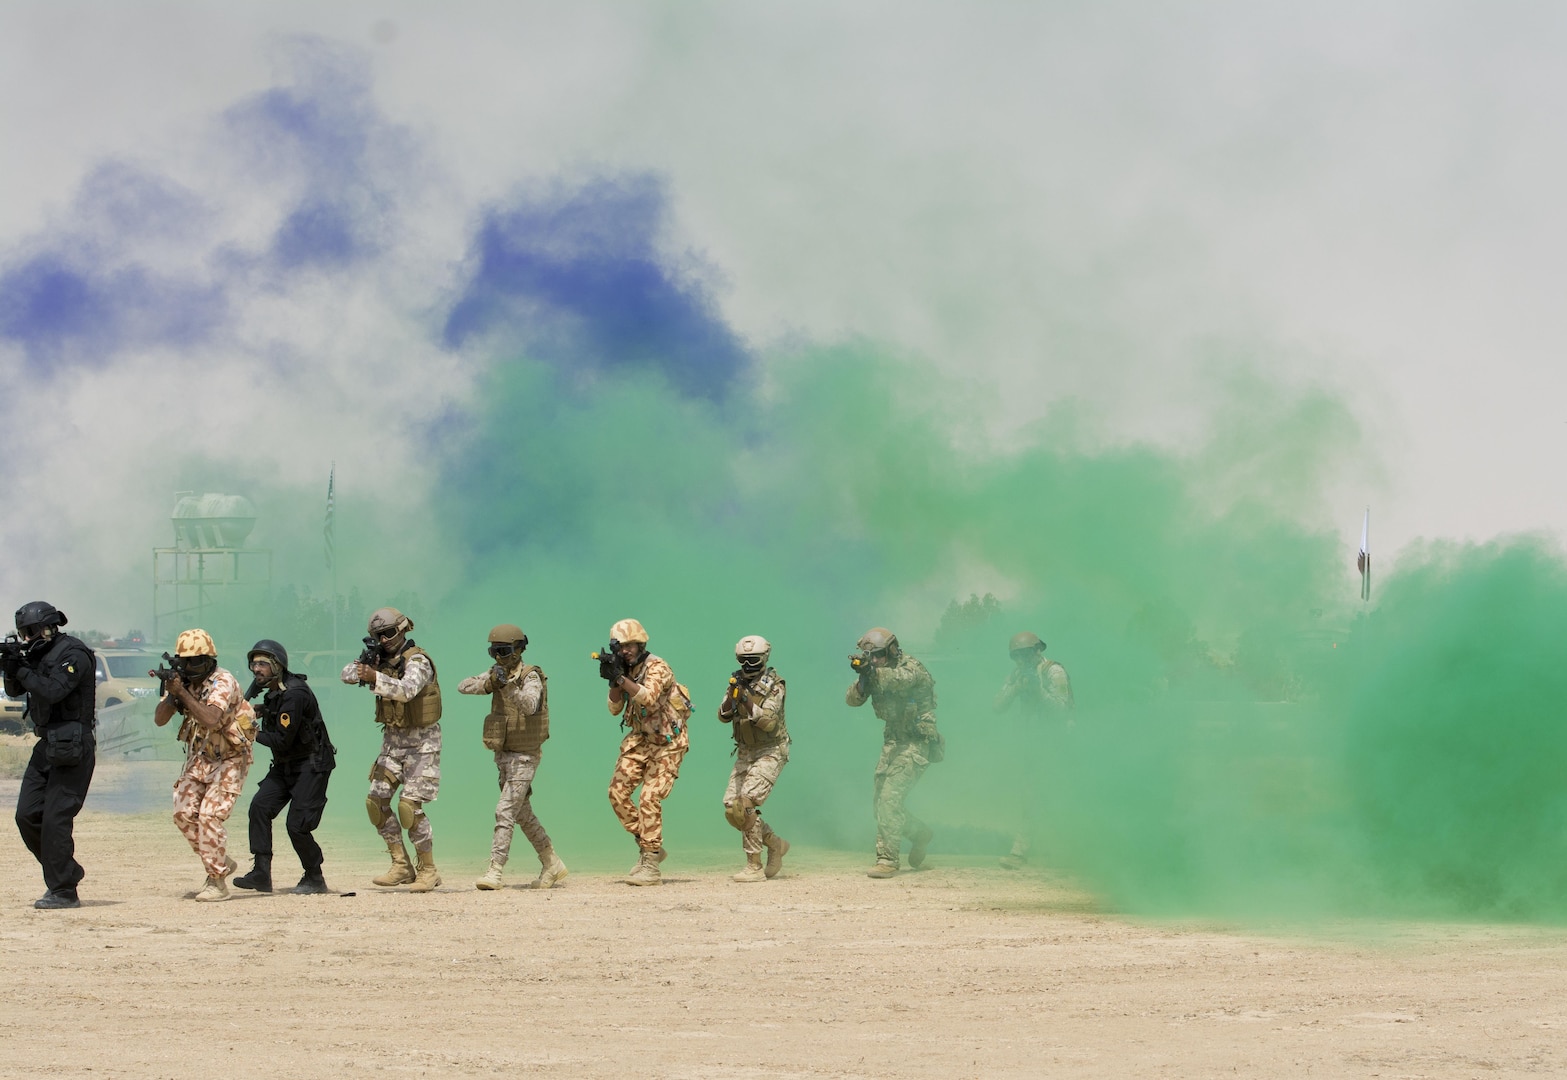 Kuwait- A large crowd of foreign and U.S. dignitaries’ view teams comprised of their combined special forces emerge from a purple and green smoke screen during an explosive training mission demonstrating the successful interoperability of Qatar, Kuwait, Saudi Arabia and the United States as partner nations and part of Operation Eagle Resolve involving both land and air elements, April 2. 
(Photo by Army Sgt. 1st Class Suzanne Ringle/Released)